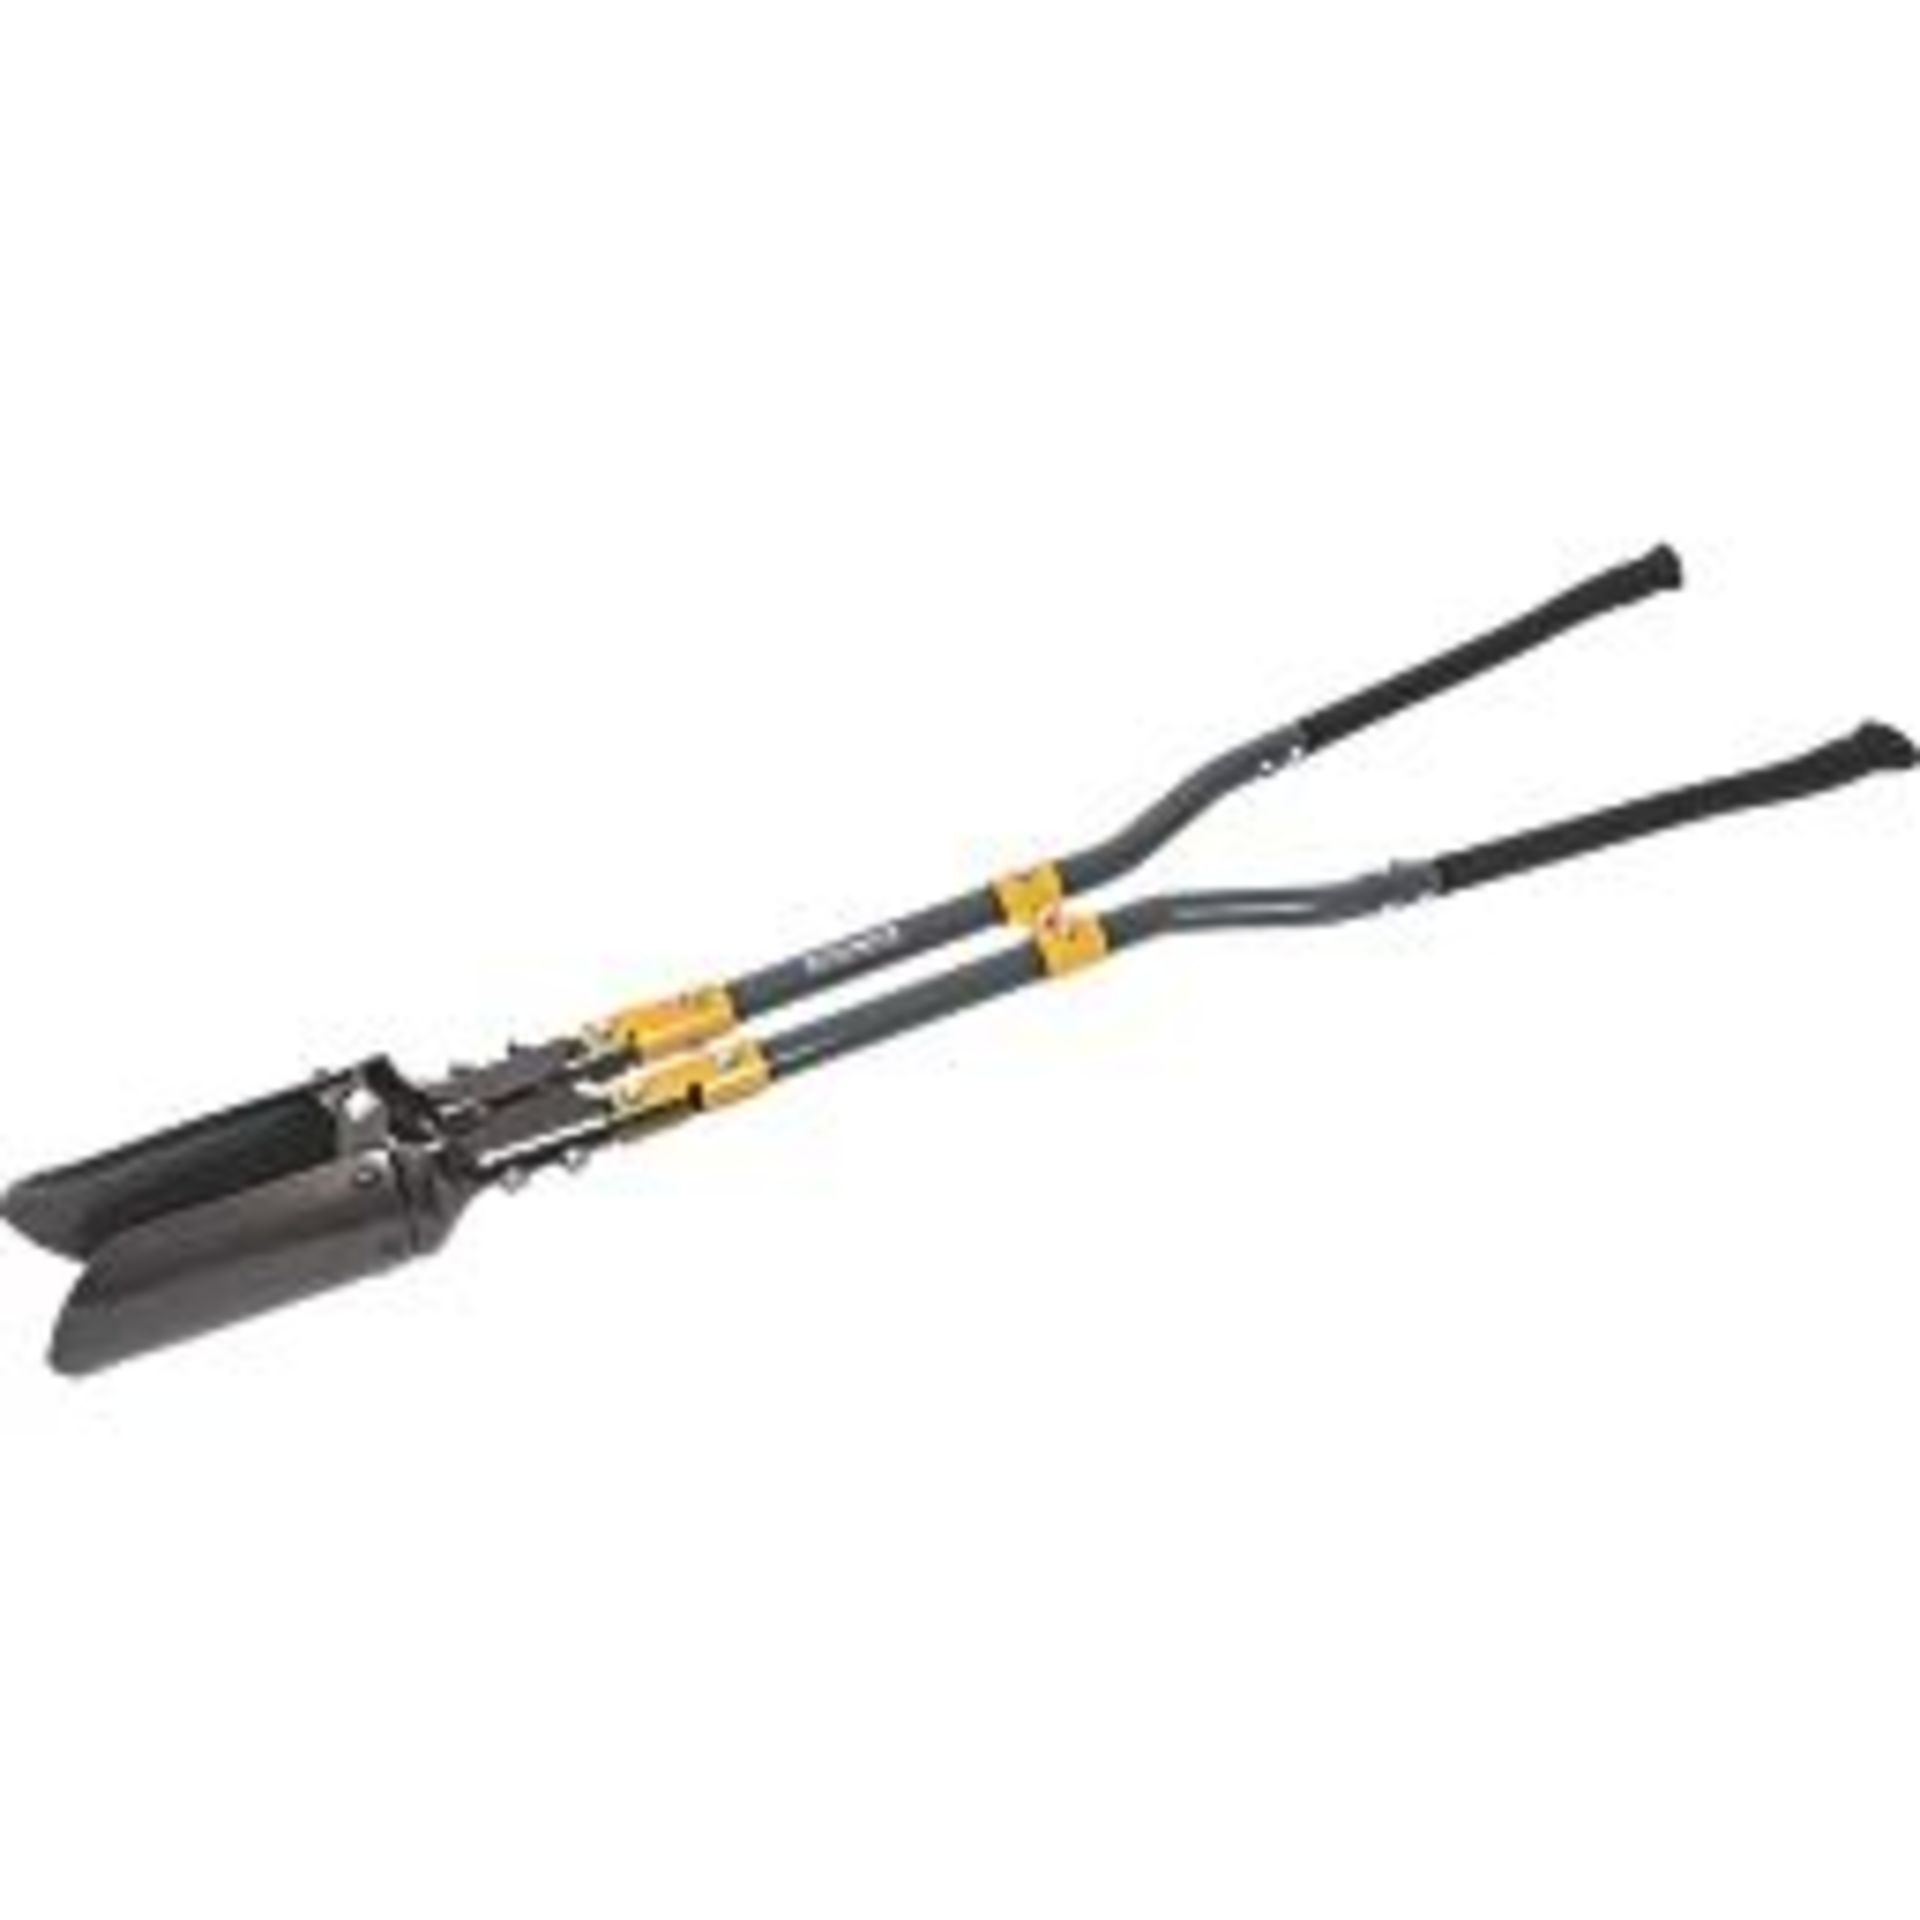 ROUGHNECK HEAVY DUTY 15LB POST-HOLE DIGGER. - R14.13. 15lb (6.79kg). Large, heavy duty head and